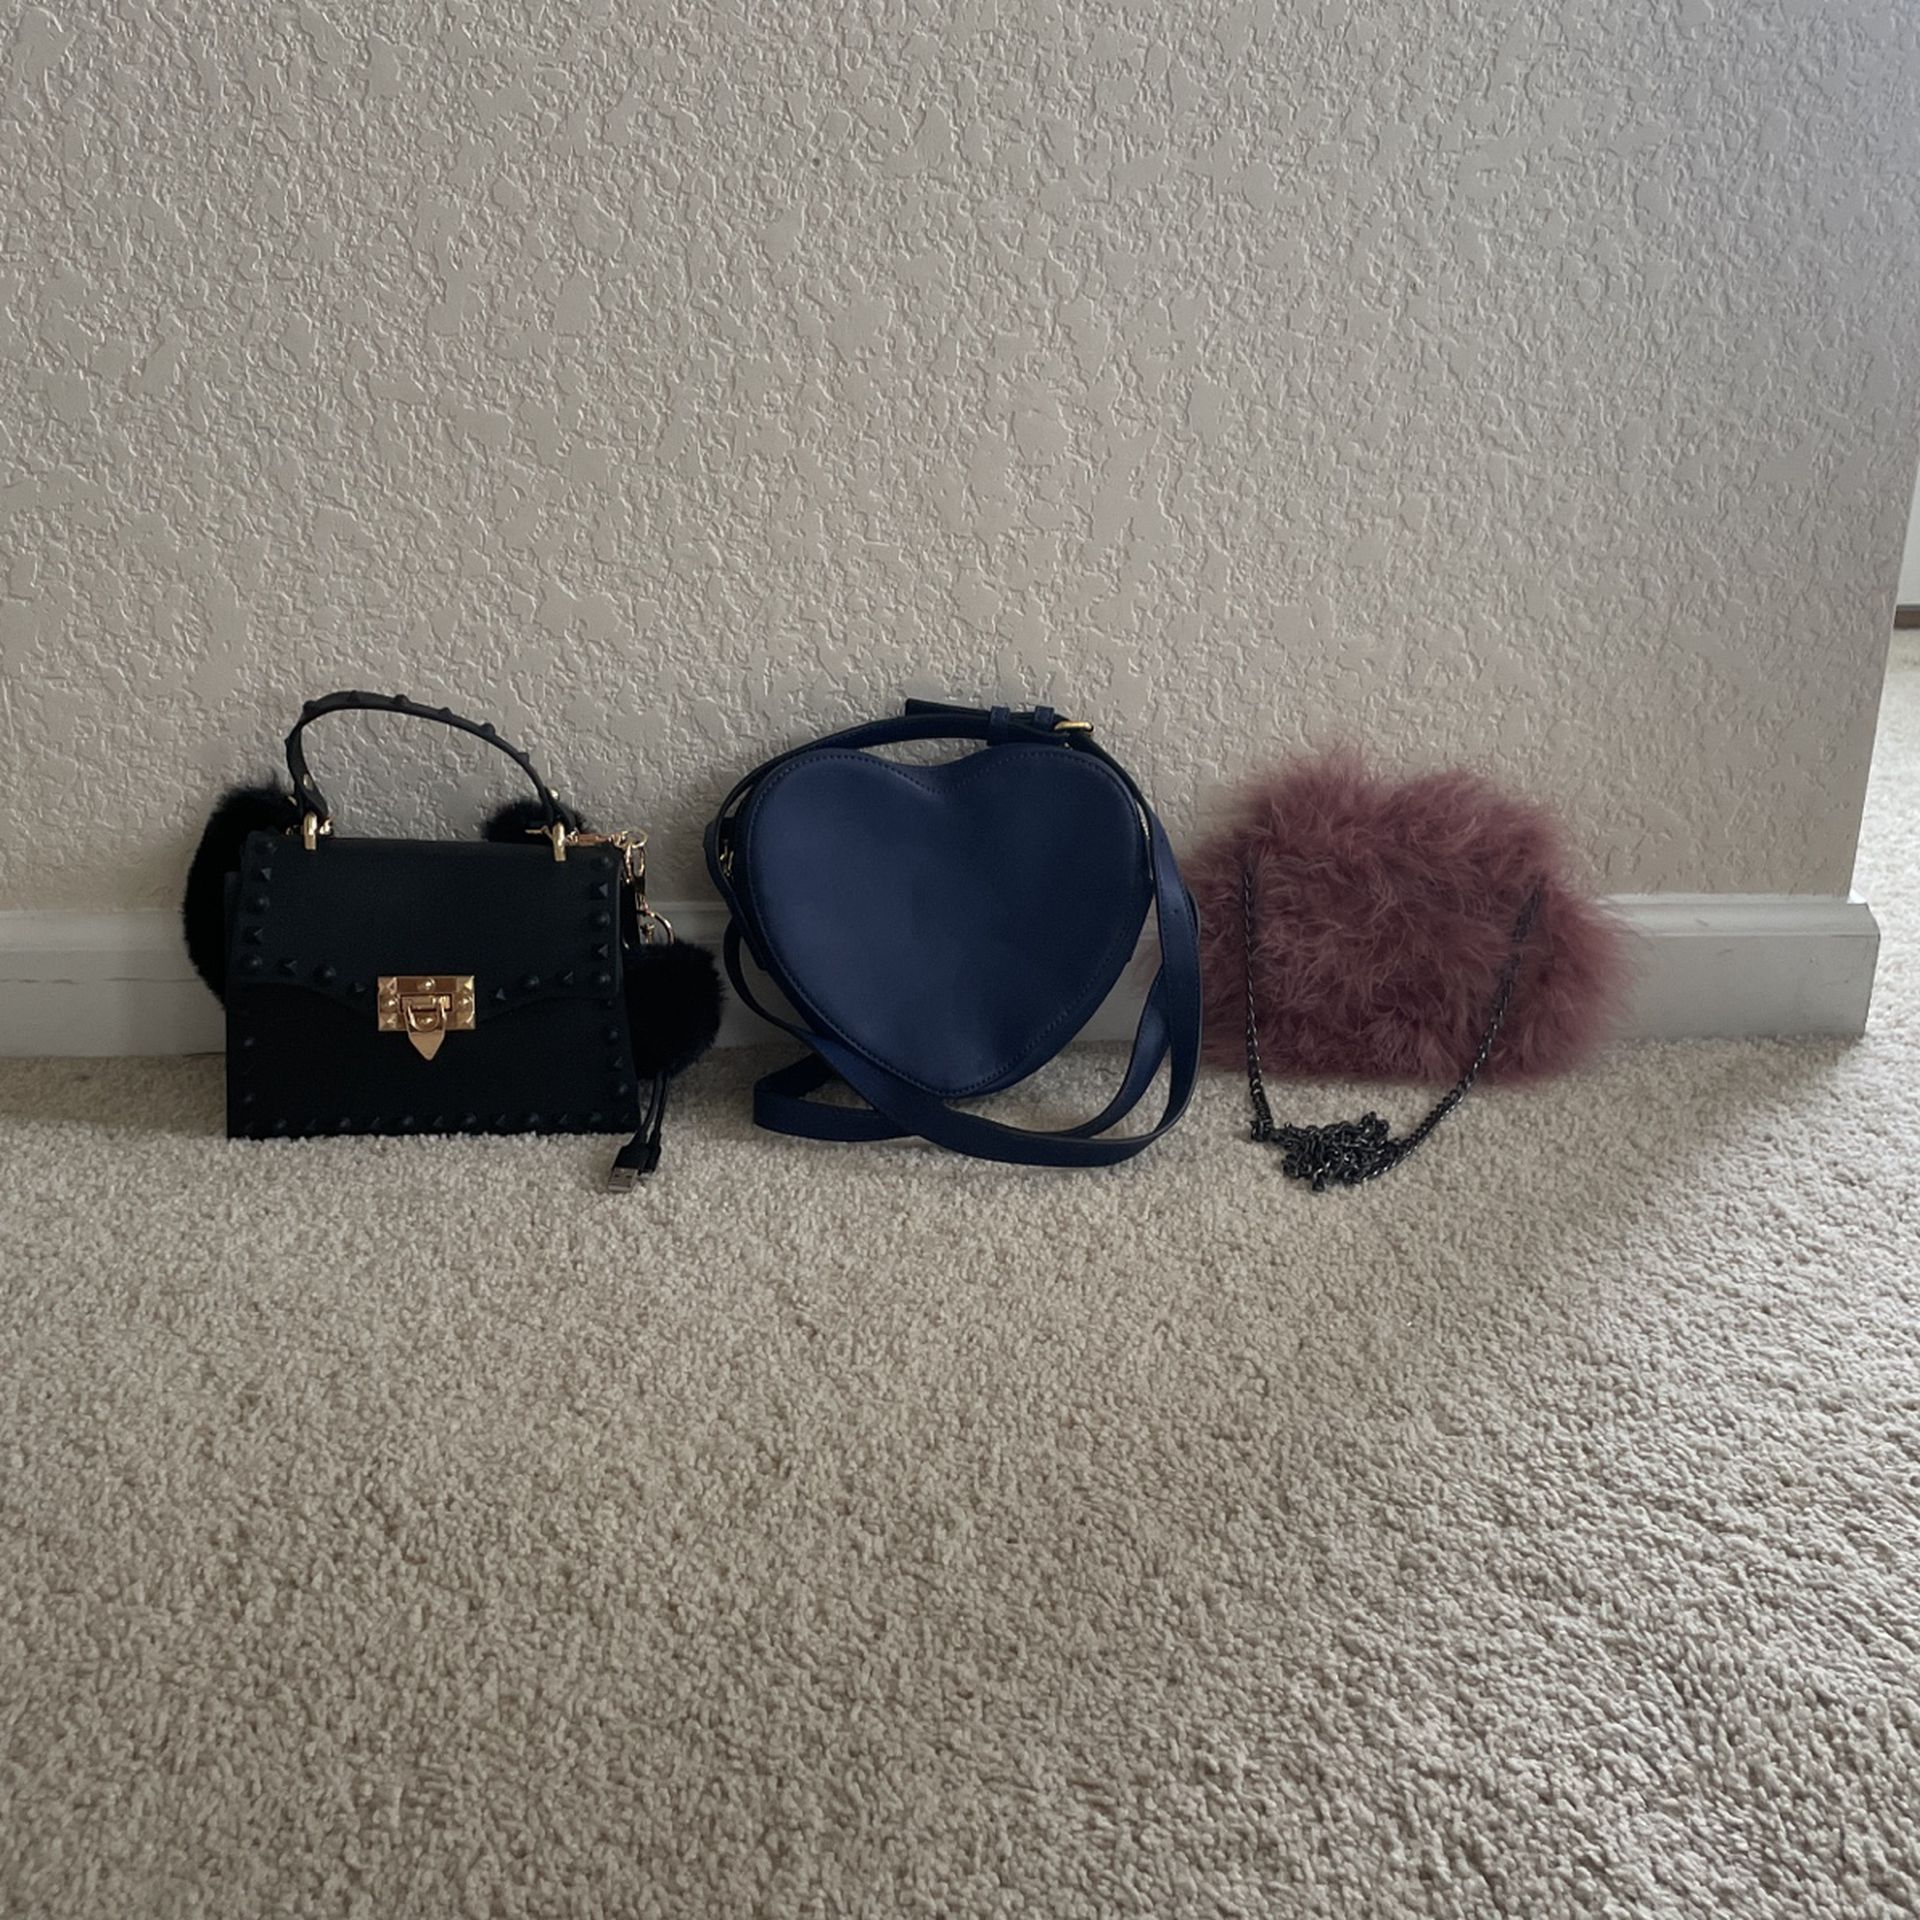 Small Handbags $10 each Or $25 for all 3